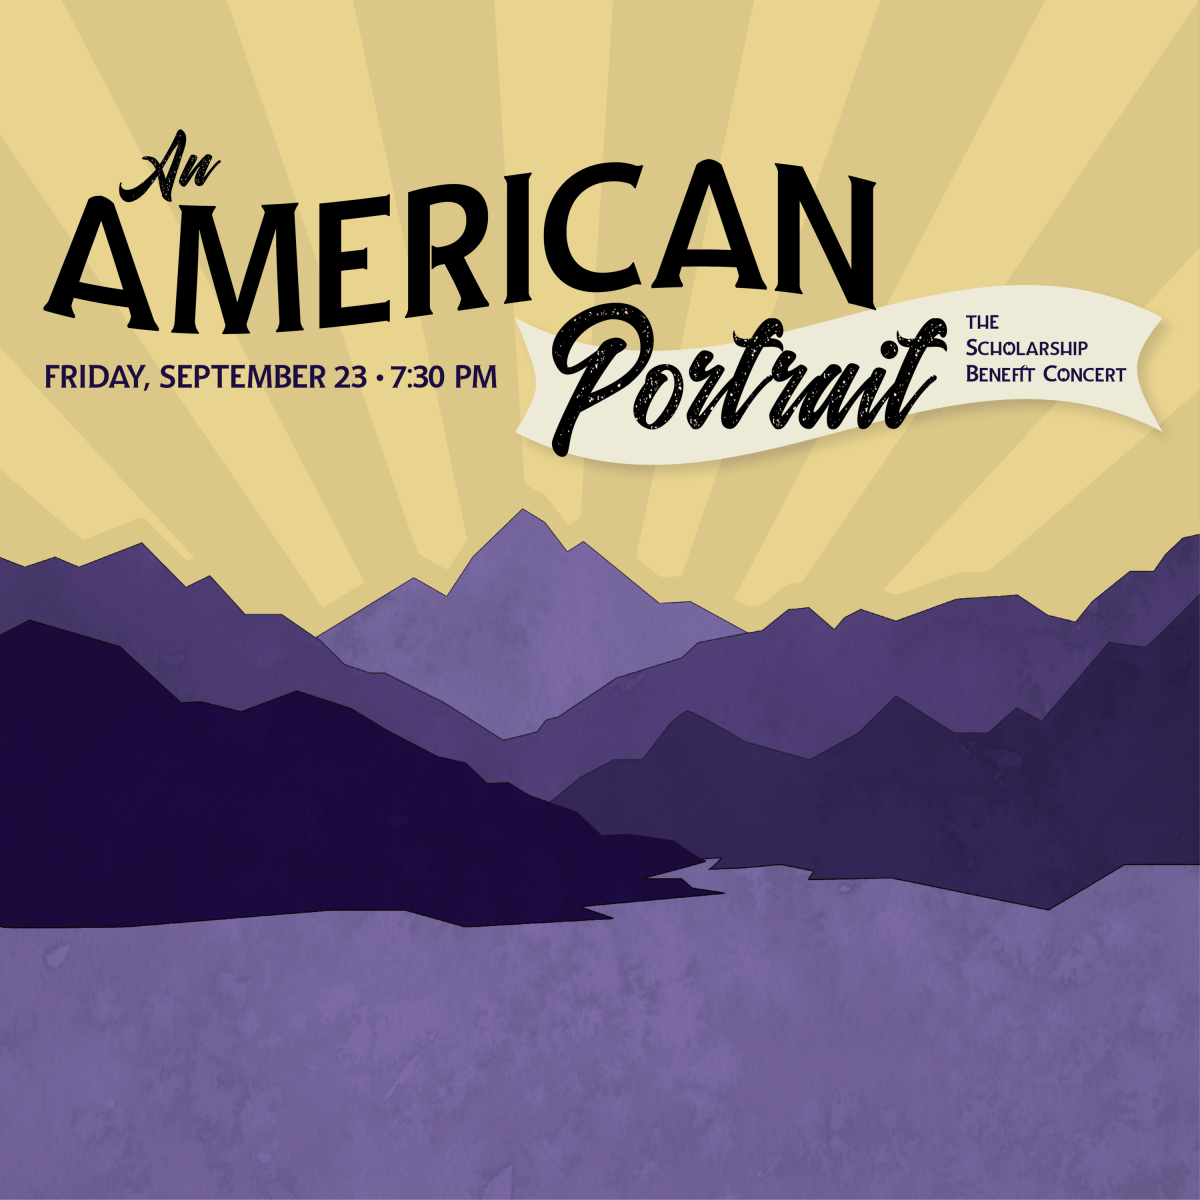 An American Portrait: the Scholarship Benefit Concert, Friday, September 23 at 7:30 p.m.